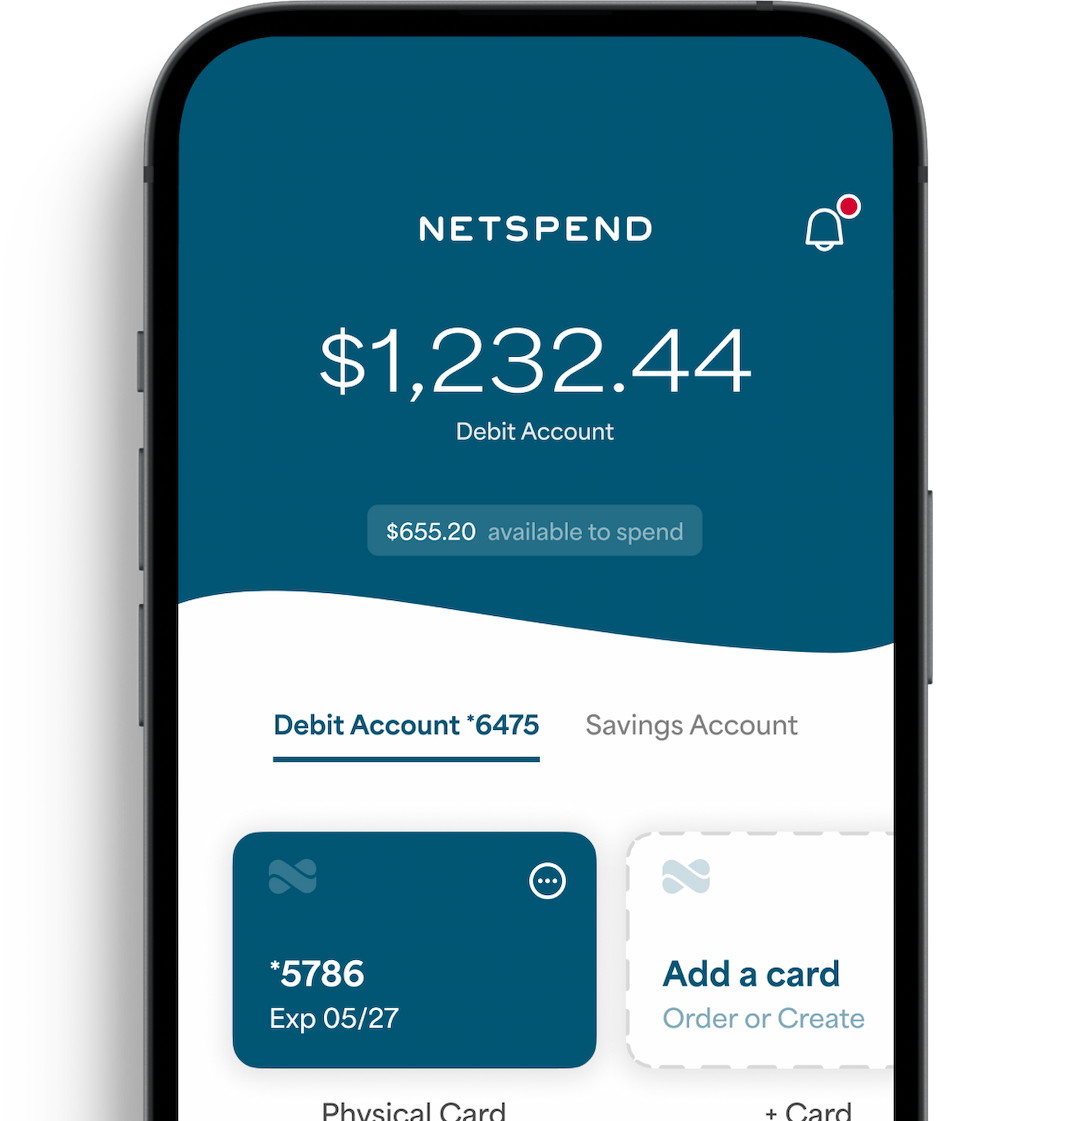 The Netspend app displaying a debit account balance on an iPhone